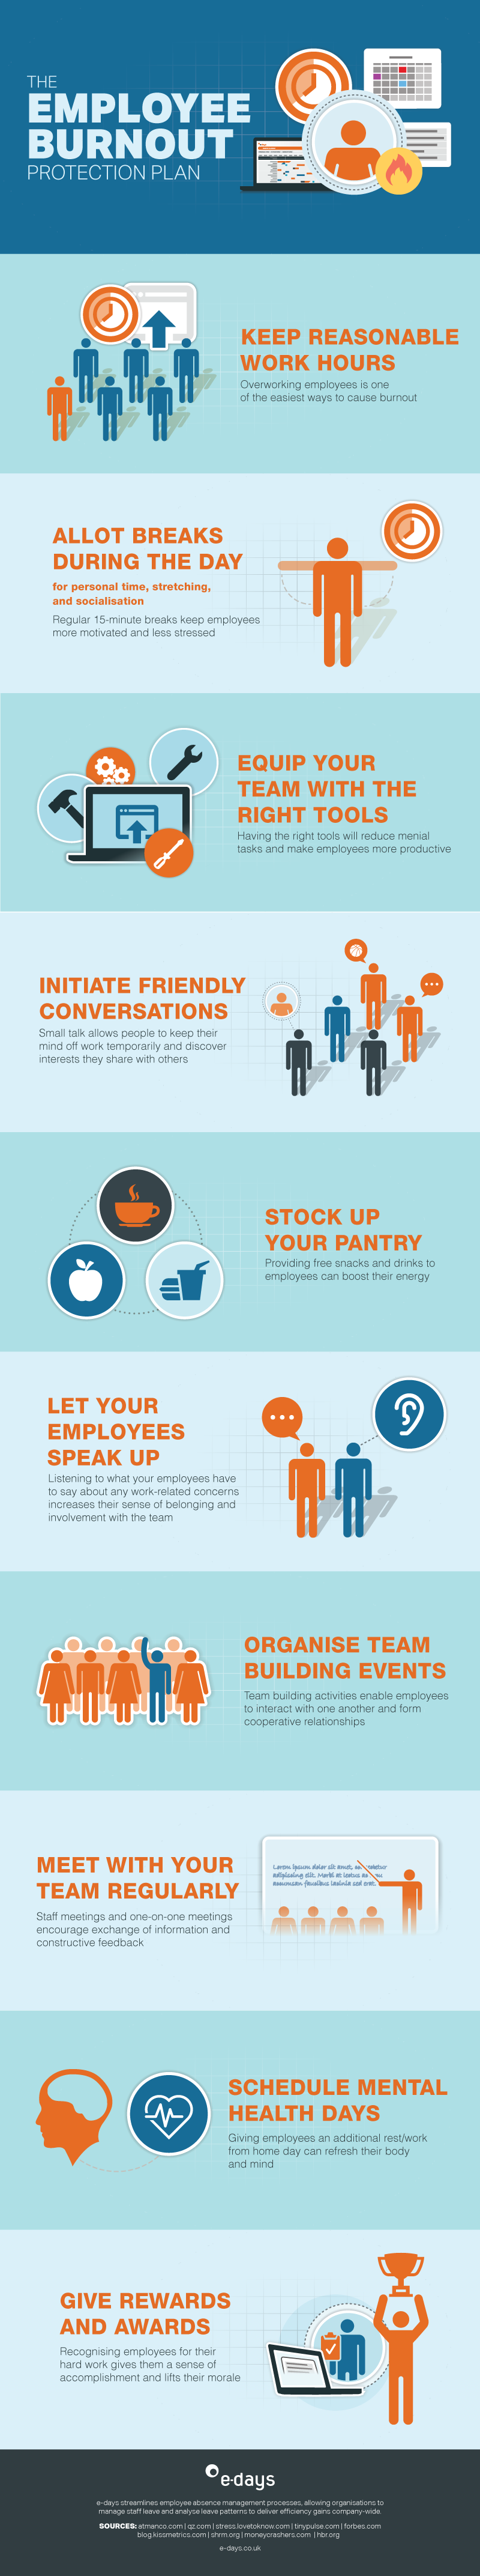 How to Protect Employees from Burnout Problems - Infographic